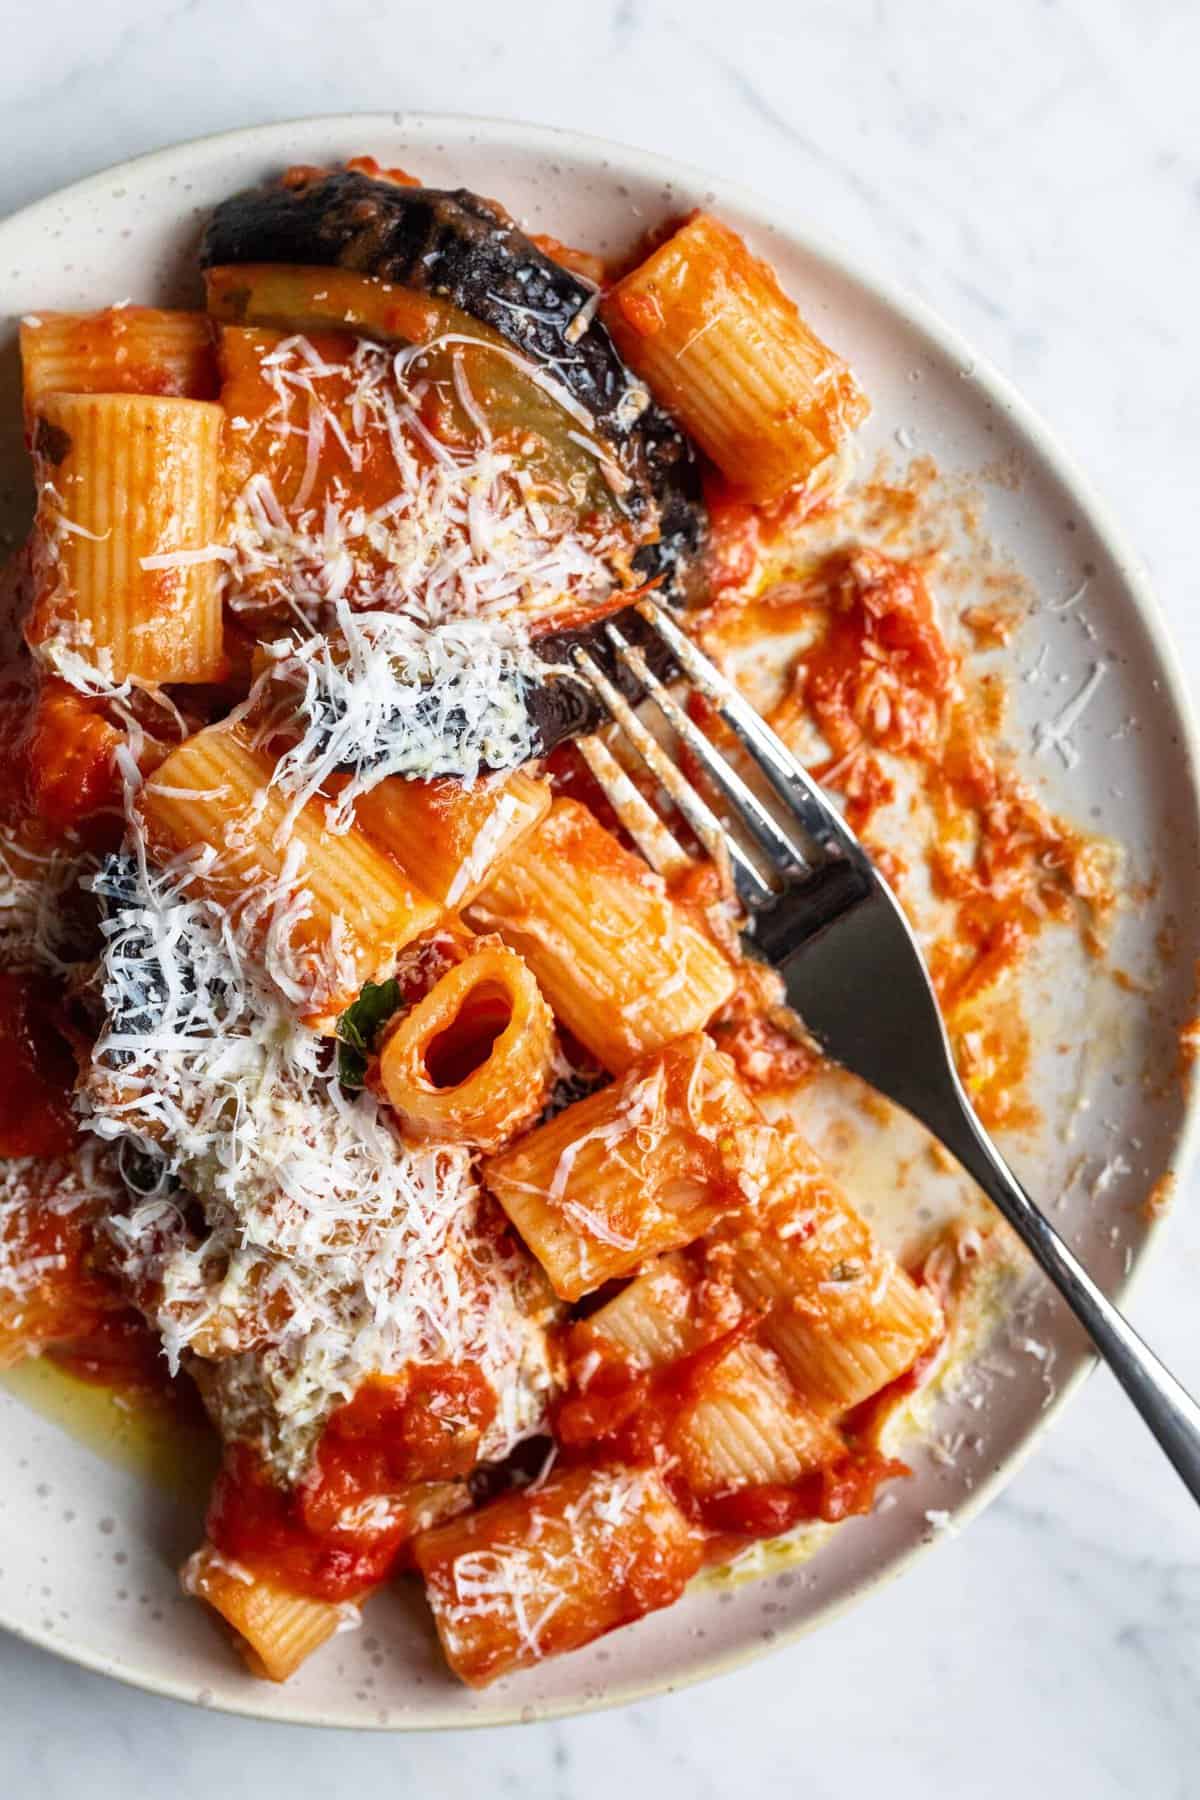 A plate of Pasta Alla Norma topped with freshly grated parmesan cheese.